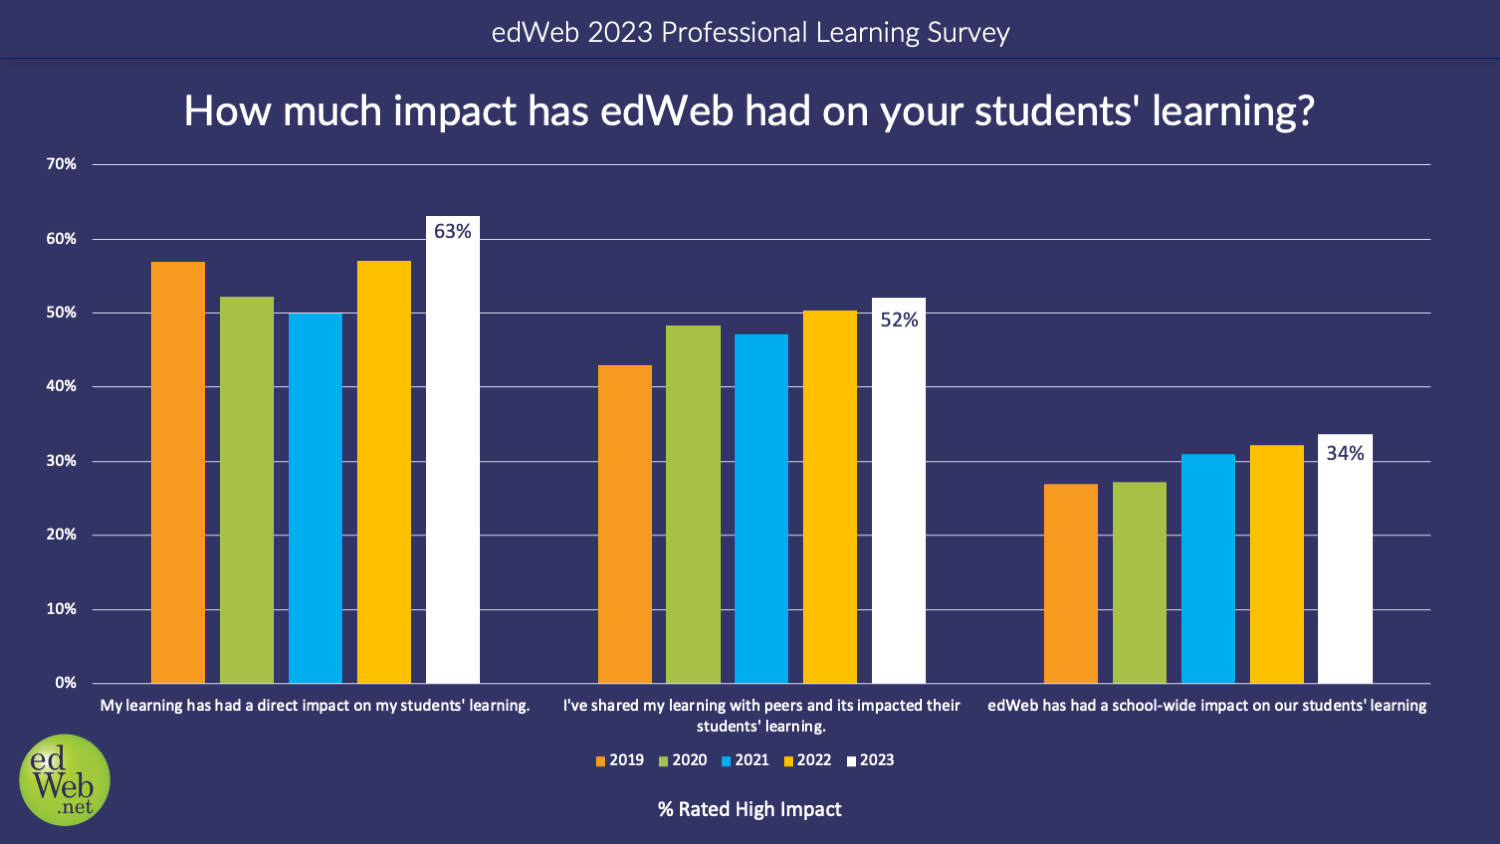 How much impact has edWeb had on your students' learning?